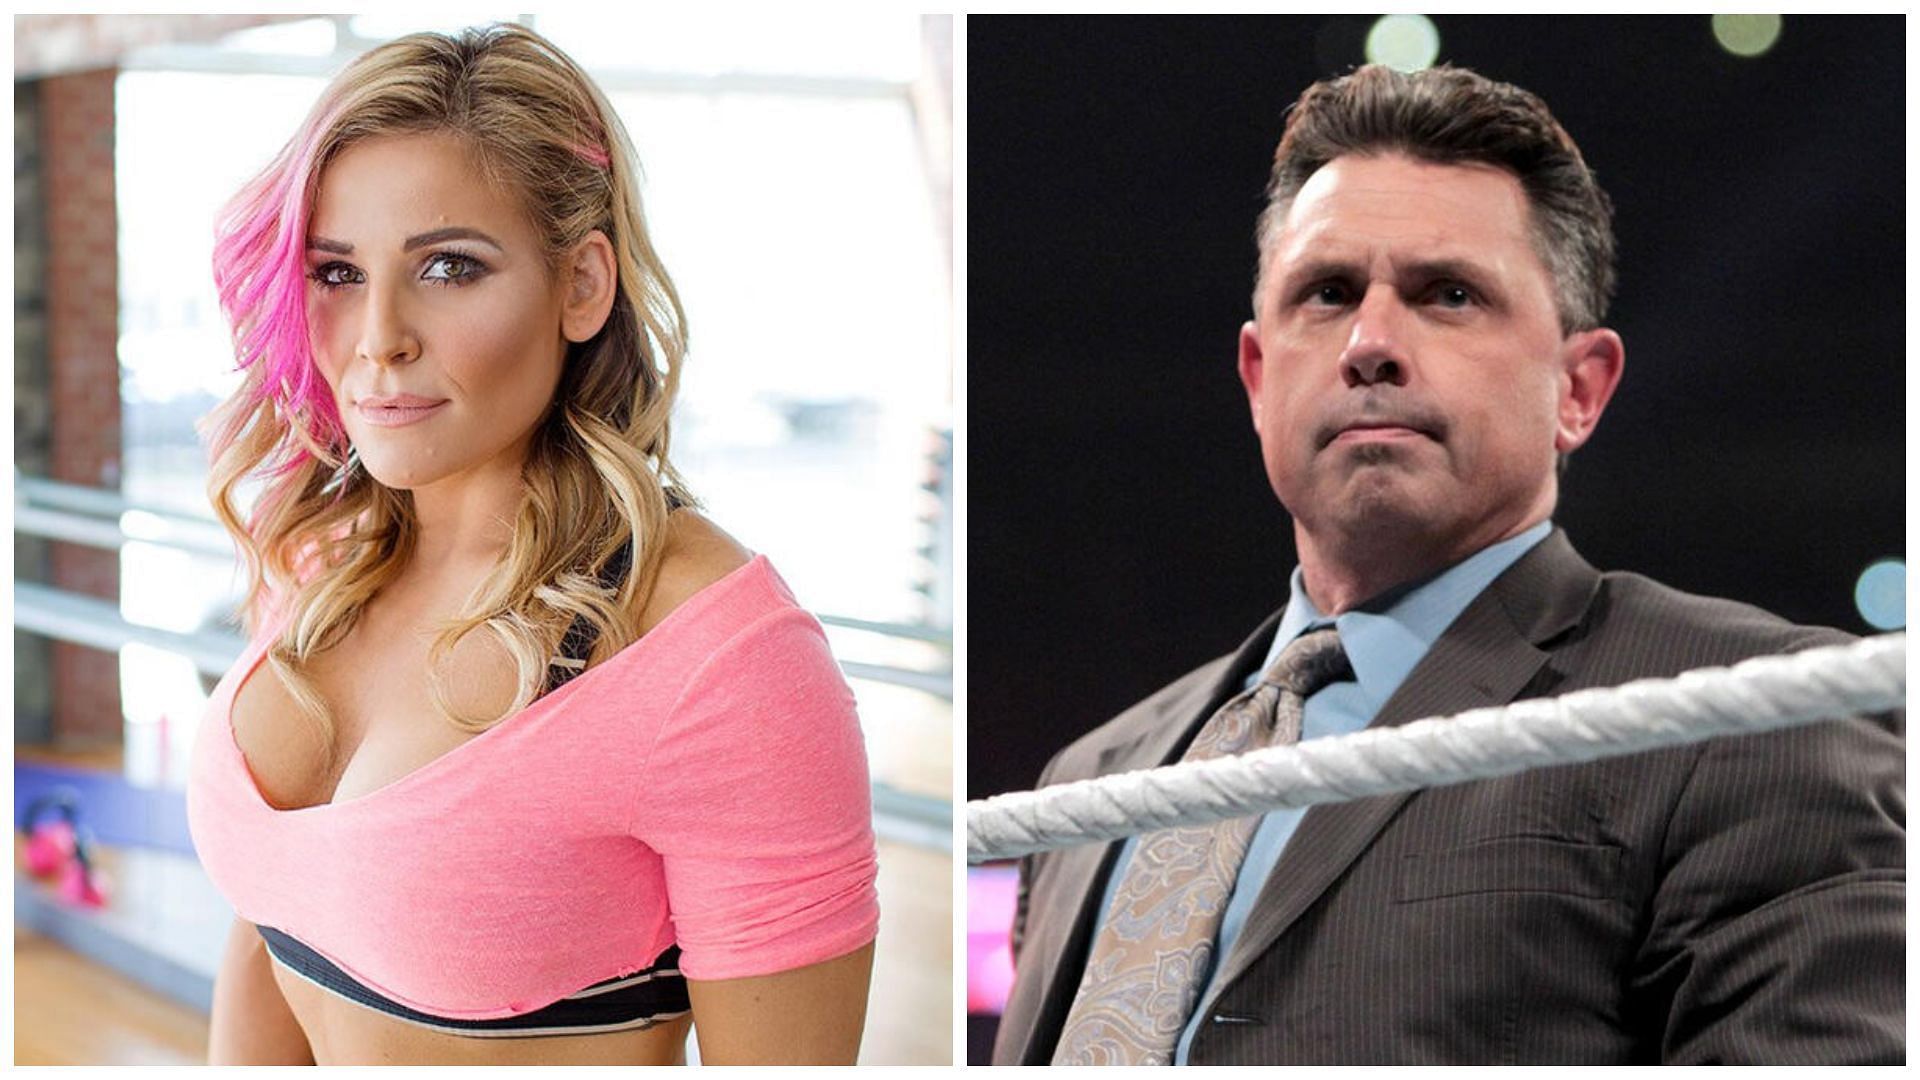 Natalya (left) and Michael Cole (right).